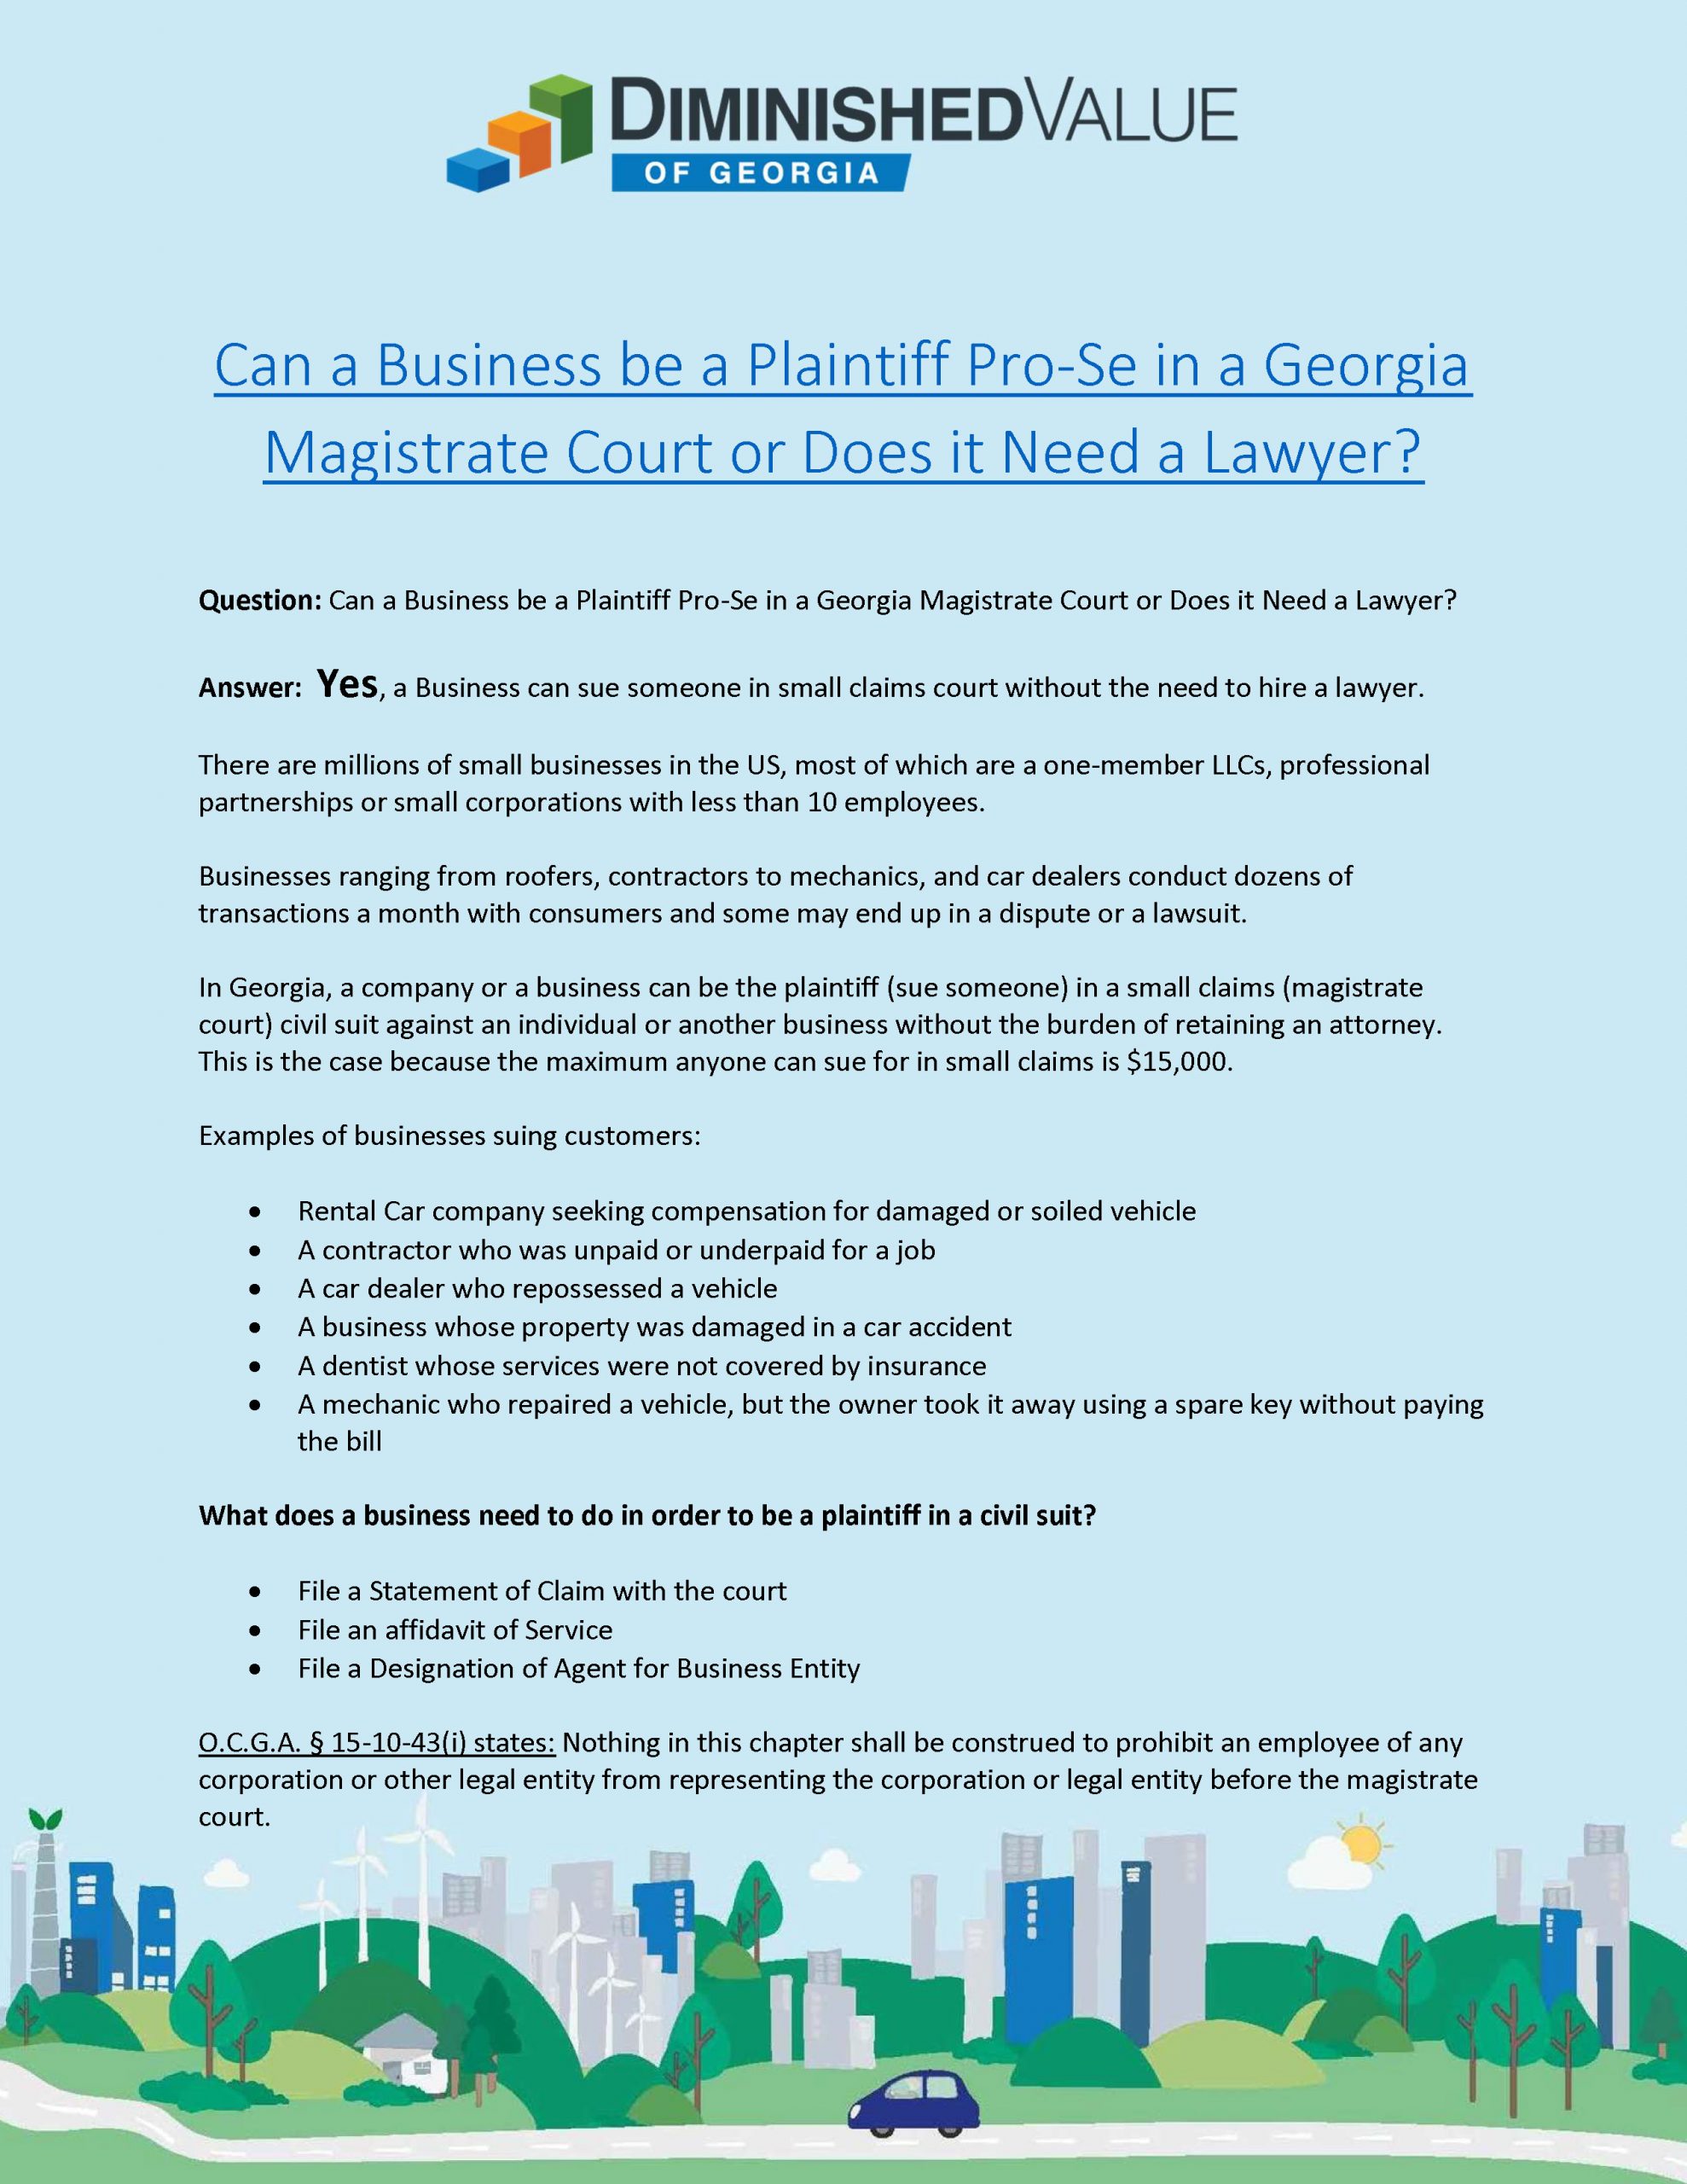 Can a Business be a Plaintiff Pro Se in a Georgia Magistrate Court or